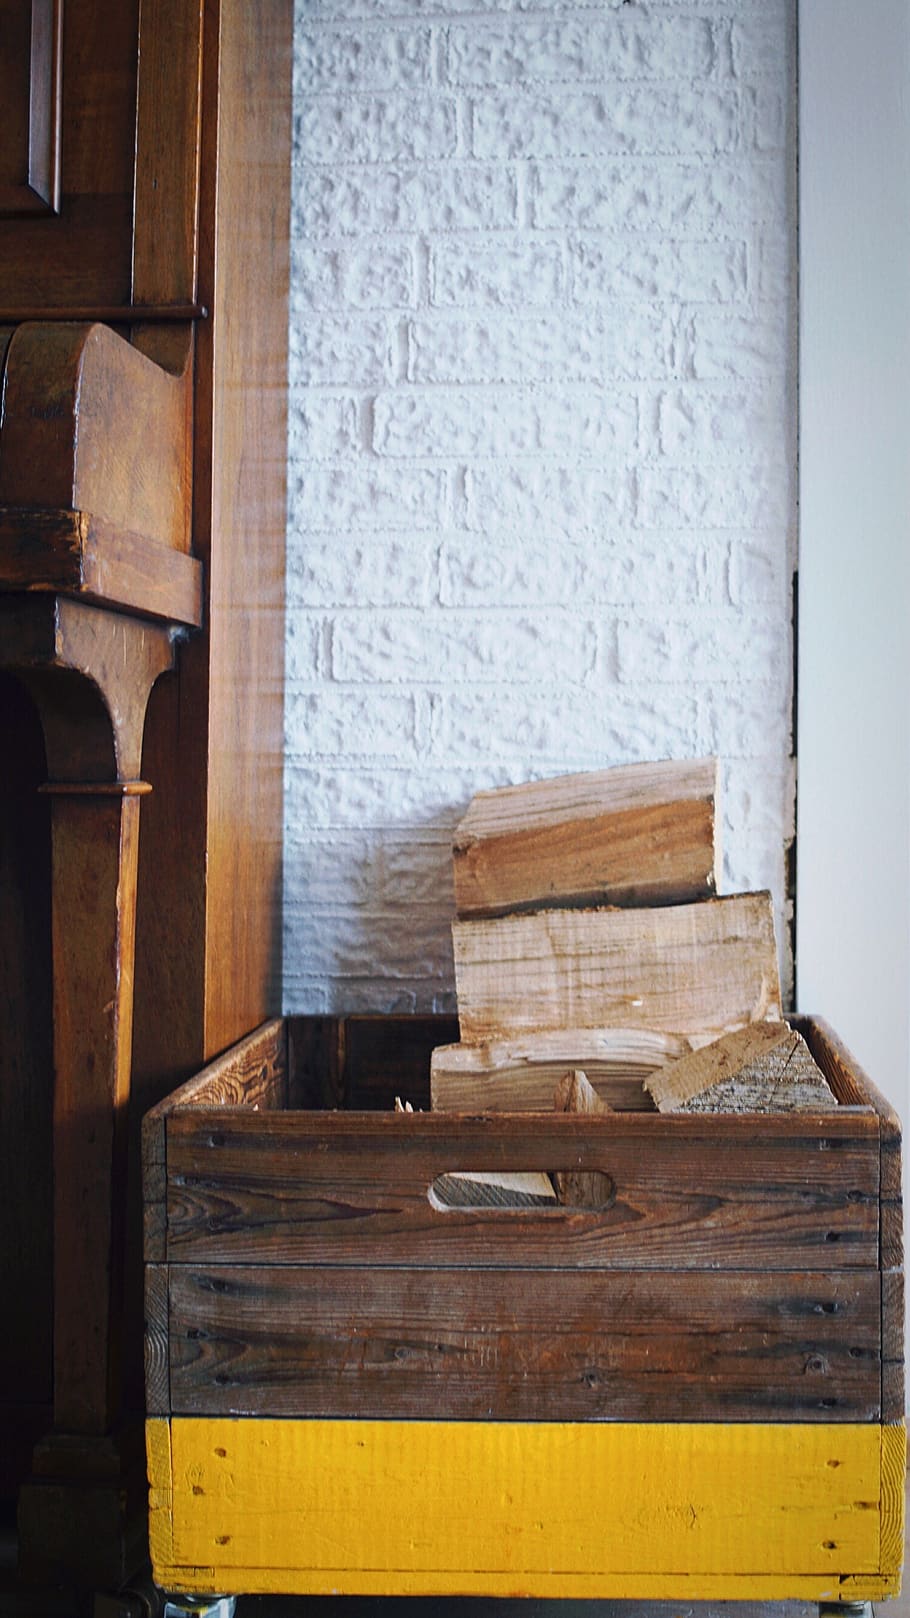 wood, box, lumber, crate, plywood, brick wall, fire wood, wooden crate